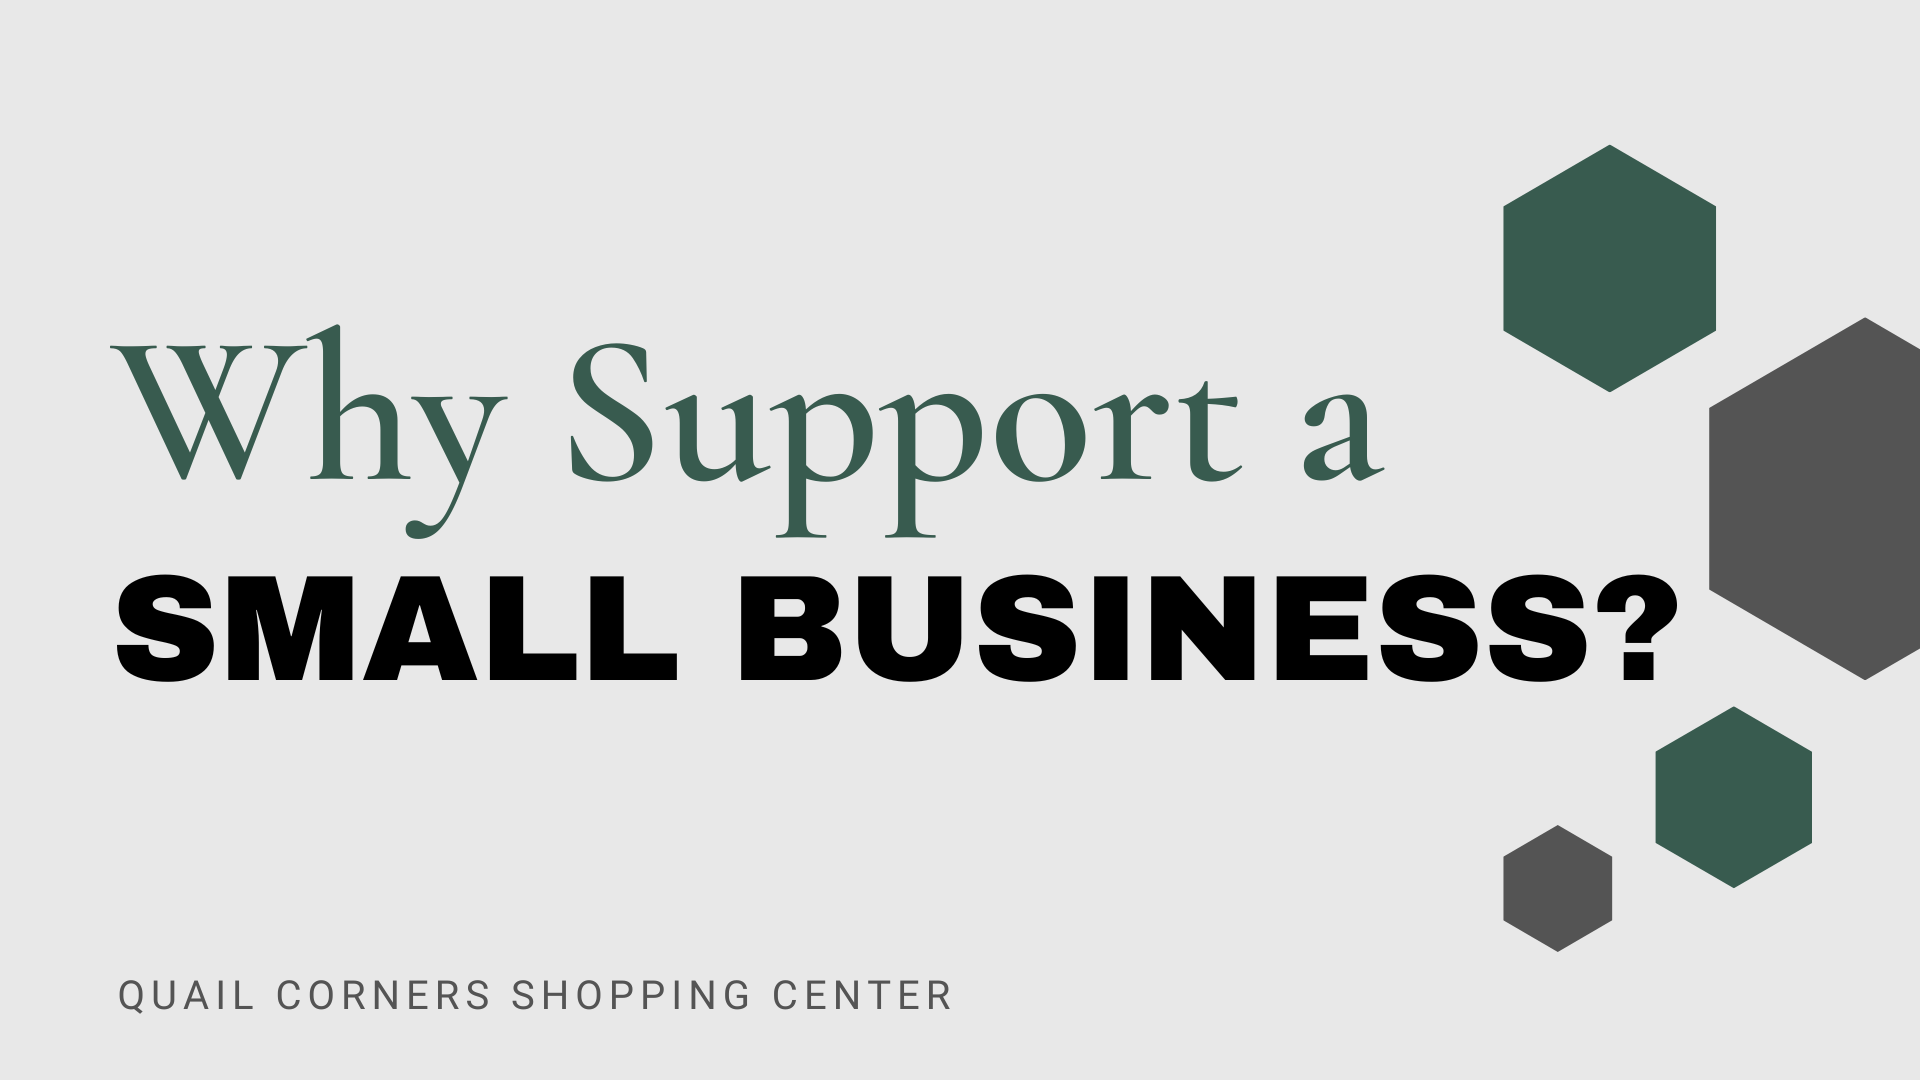 Why Support a Small Business?